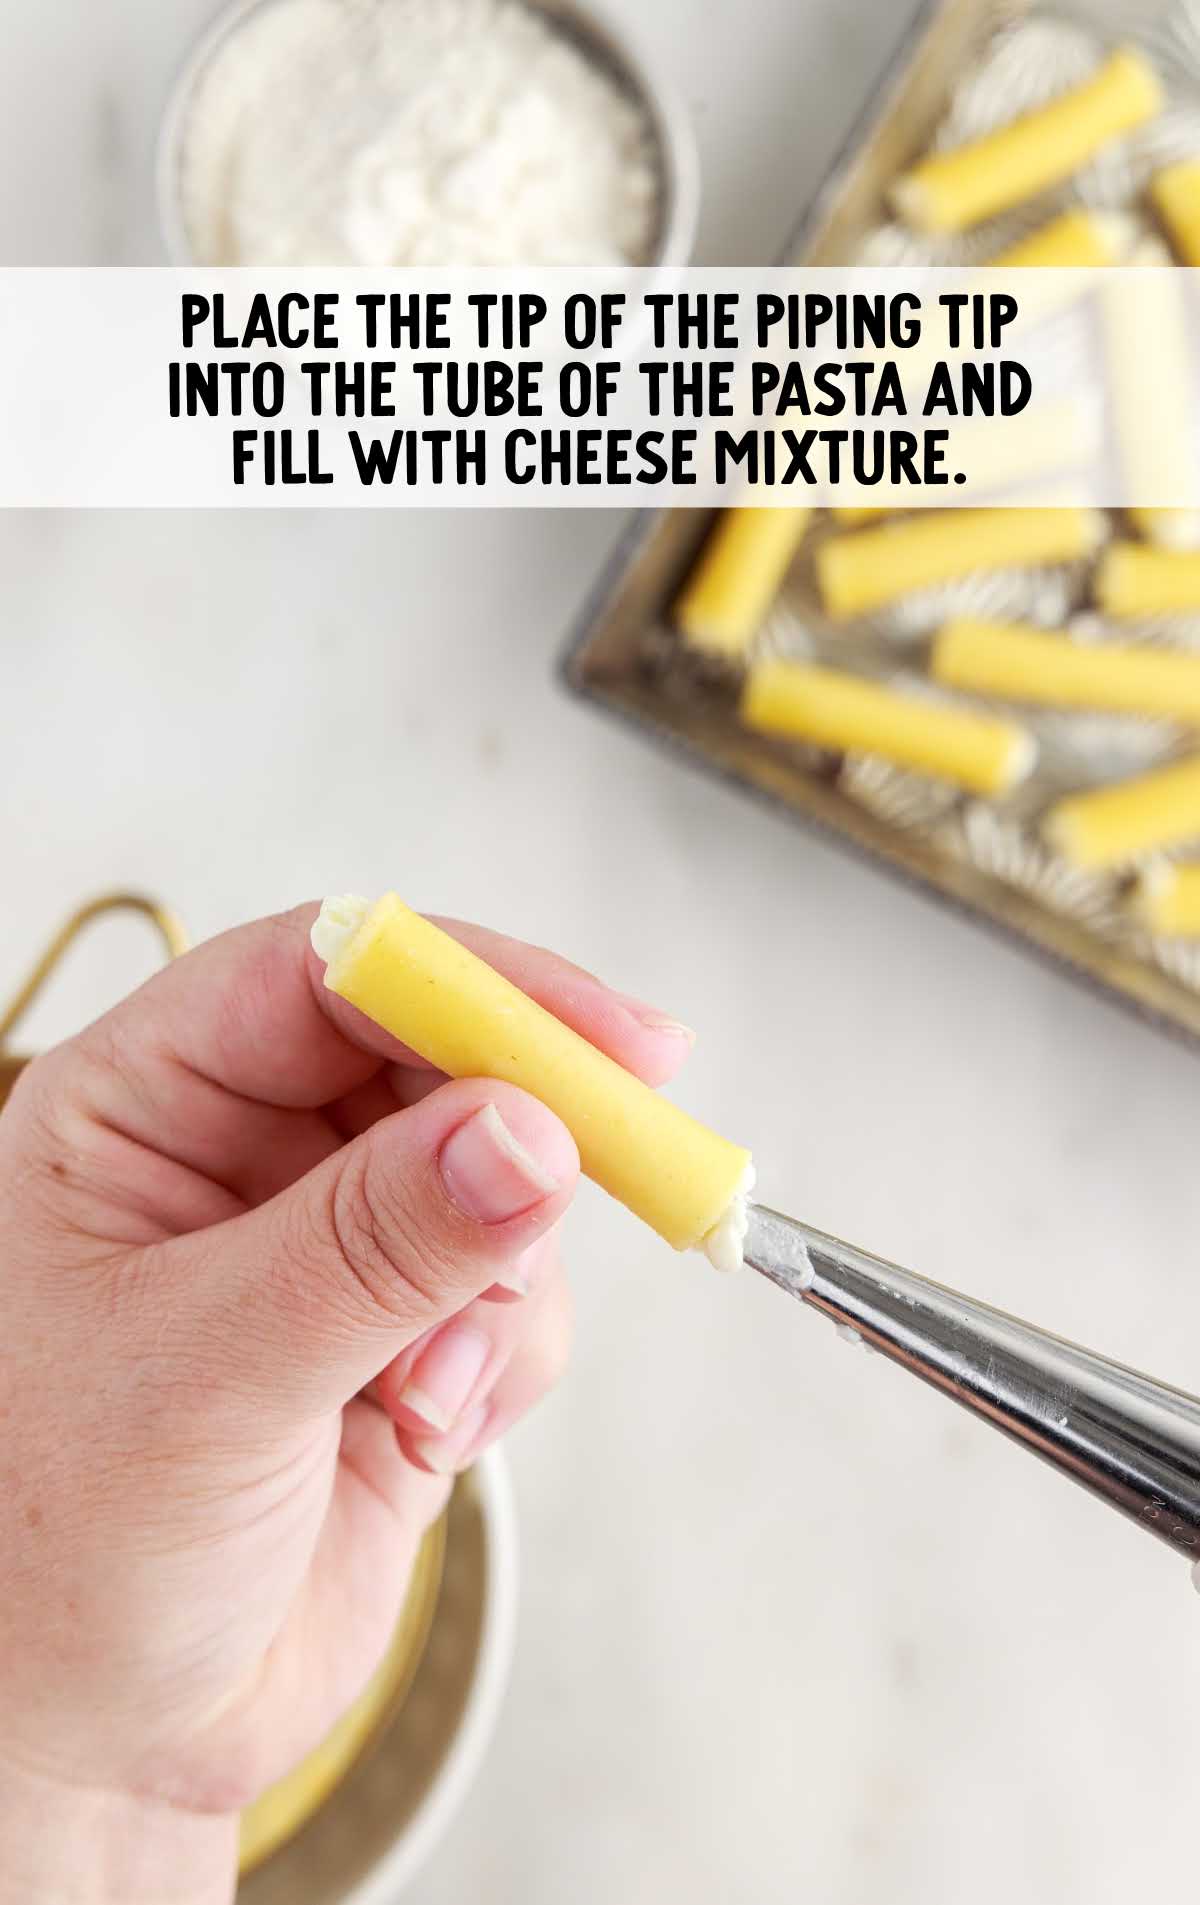 piping tip placed into the tub of the pasta and fill with cheese mixture